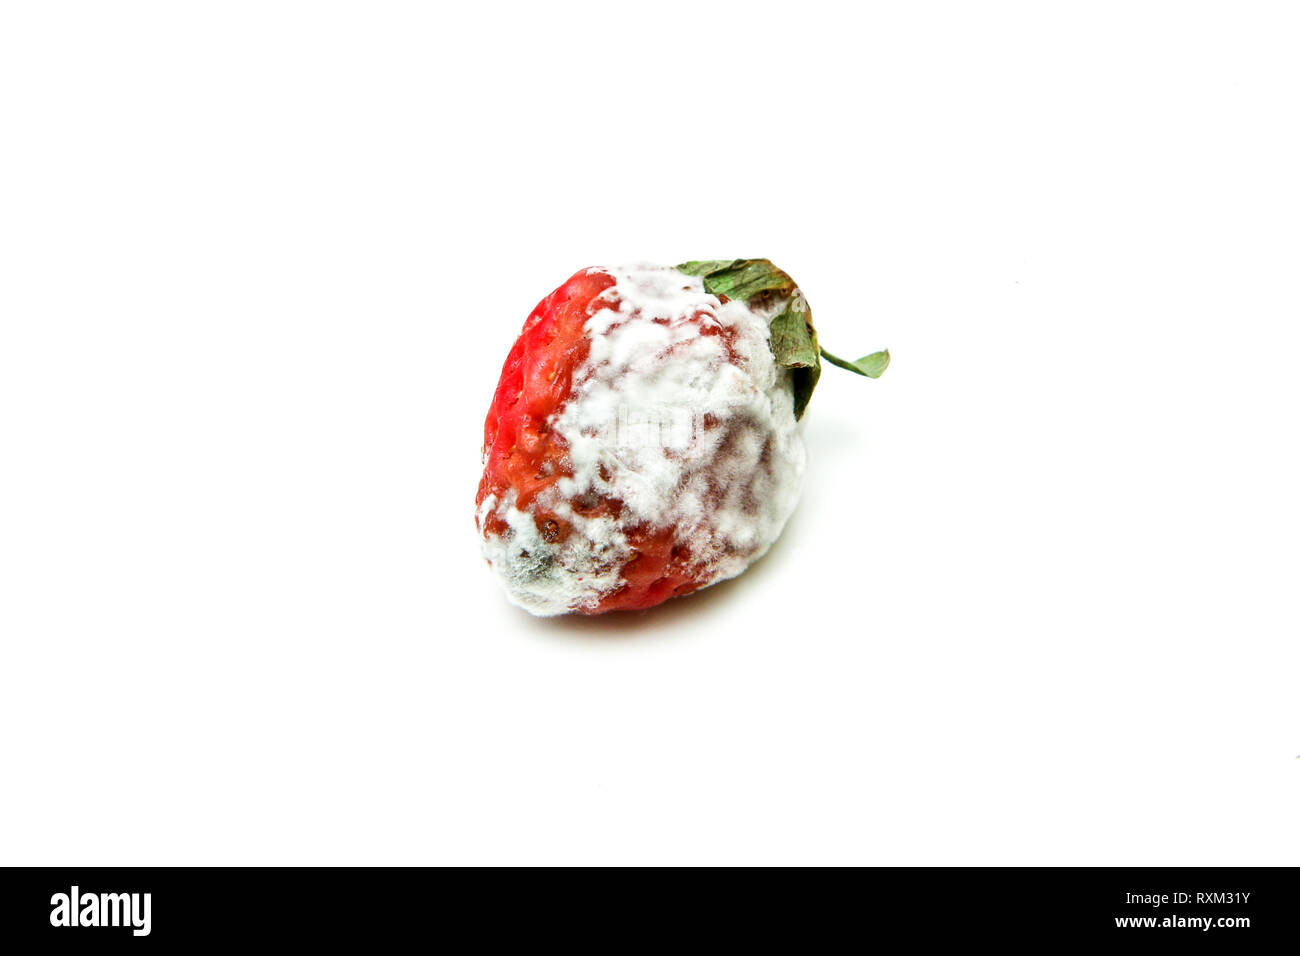 A single mouldy strawberry. Rotten and uneatable. Isolated on white background. Stock Photo